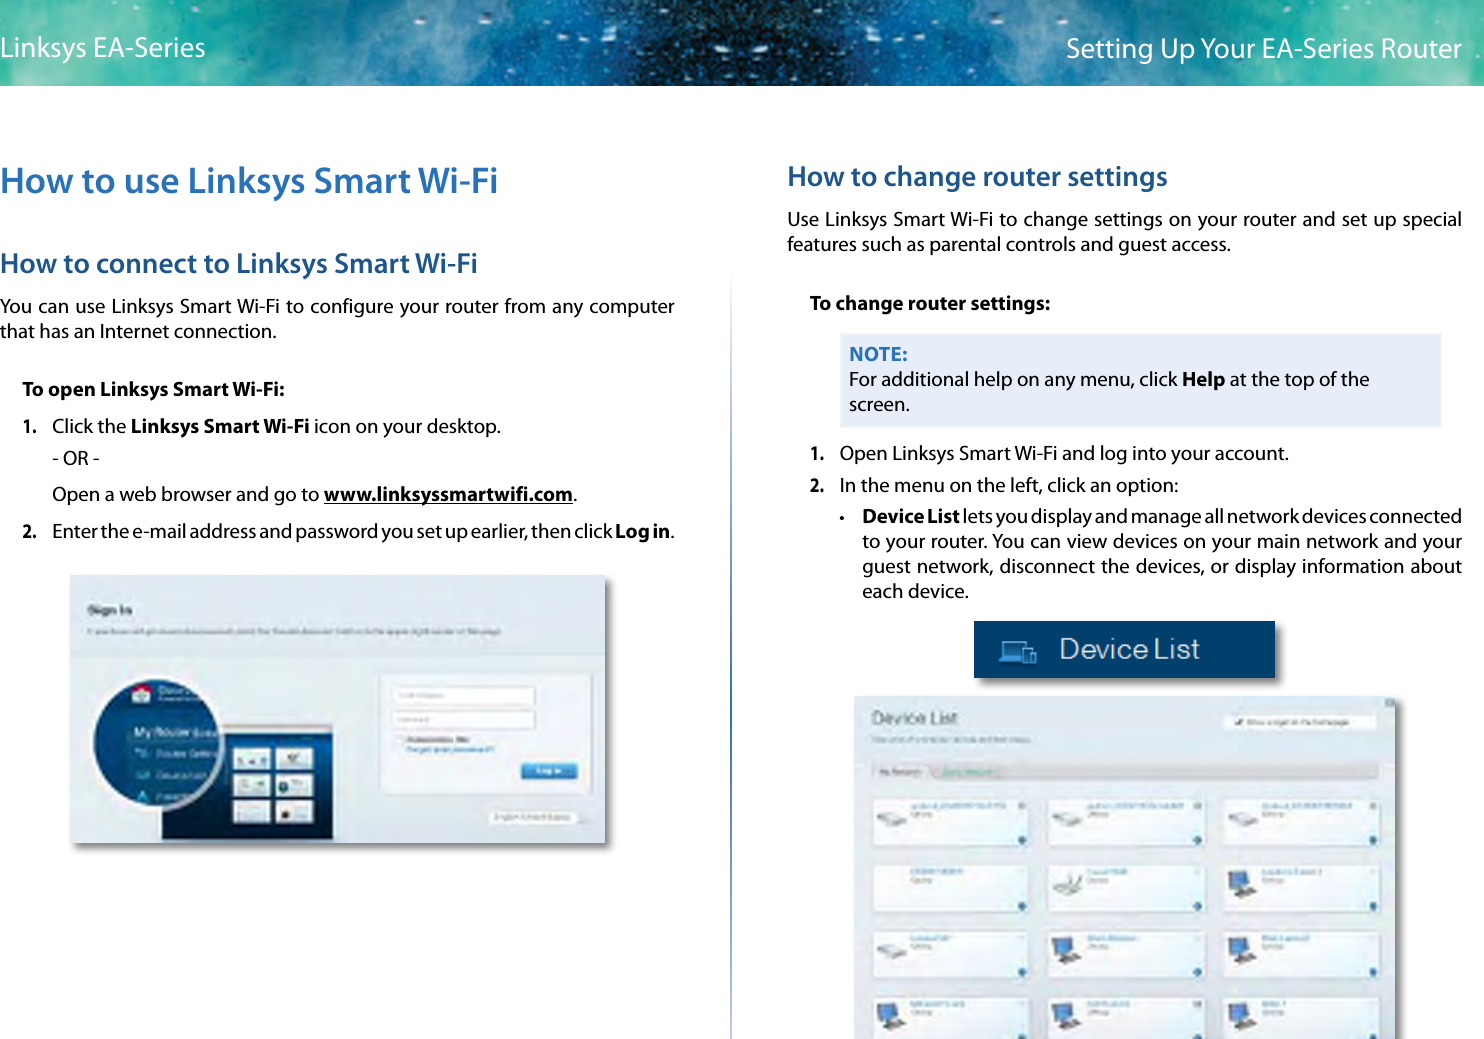 4Setting Up Your EA-Series RouterLinksys EA-SeriesHow to use Linksys Smart Wi-FiHow to connect to Linksys Smart Wi-FiYou can use Linksys Smart Wi-Fi to configure your router from any computer that has an Internet connection.To open Linksys Smart Wi-Fi:1. Click the Linksys Smart Wi-Fi icon on your desktop.- OR -Open a web browser and go to www.linksyssmartwifi.com.2. Enter the e-mail address and password you set up earlier, then clickLogin.How to change router settingsUse Linksys Smart Wi-Fi to change settings on your router and set up special features such as parental controls and guest access.To change router settings:NOTE:For additional help on any menu, click Help at the top of the screen.1. Open Linksys Smart Wi-Fi and log into your account.2. In the menu on the left, click an option: • Device List lets you display and manage all network devices connected to your router. You can view devices on your main network and your guest network, disconnect the devices, or display information about each device.